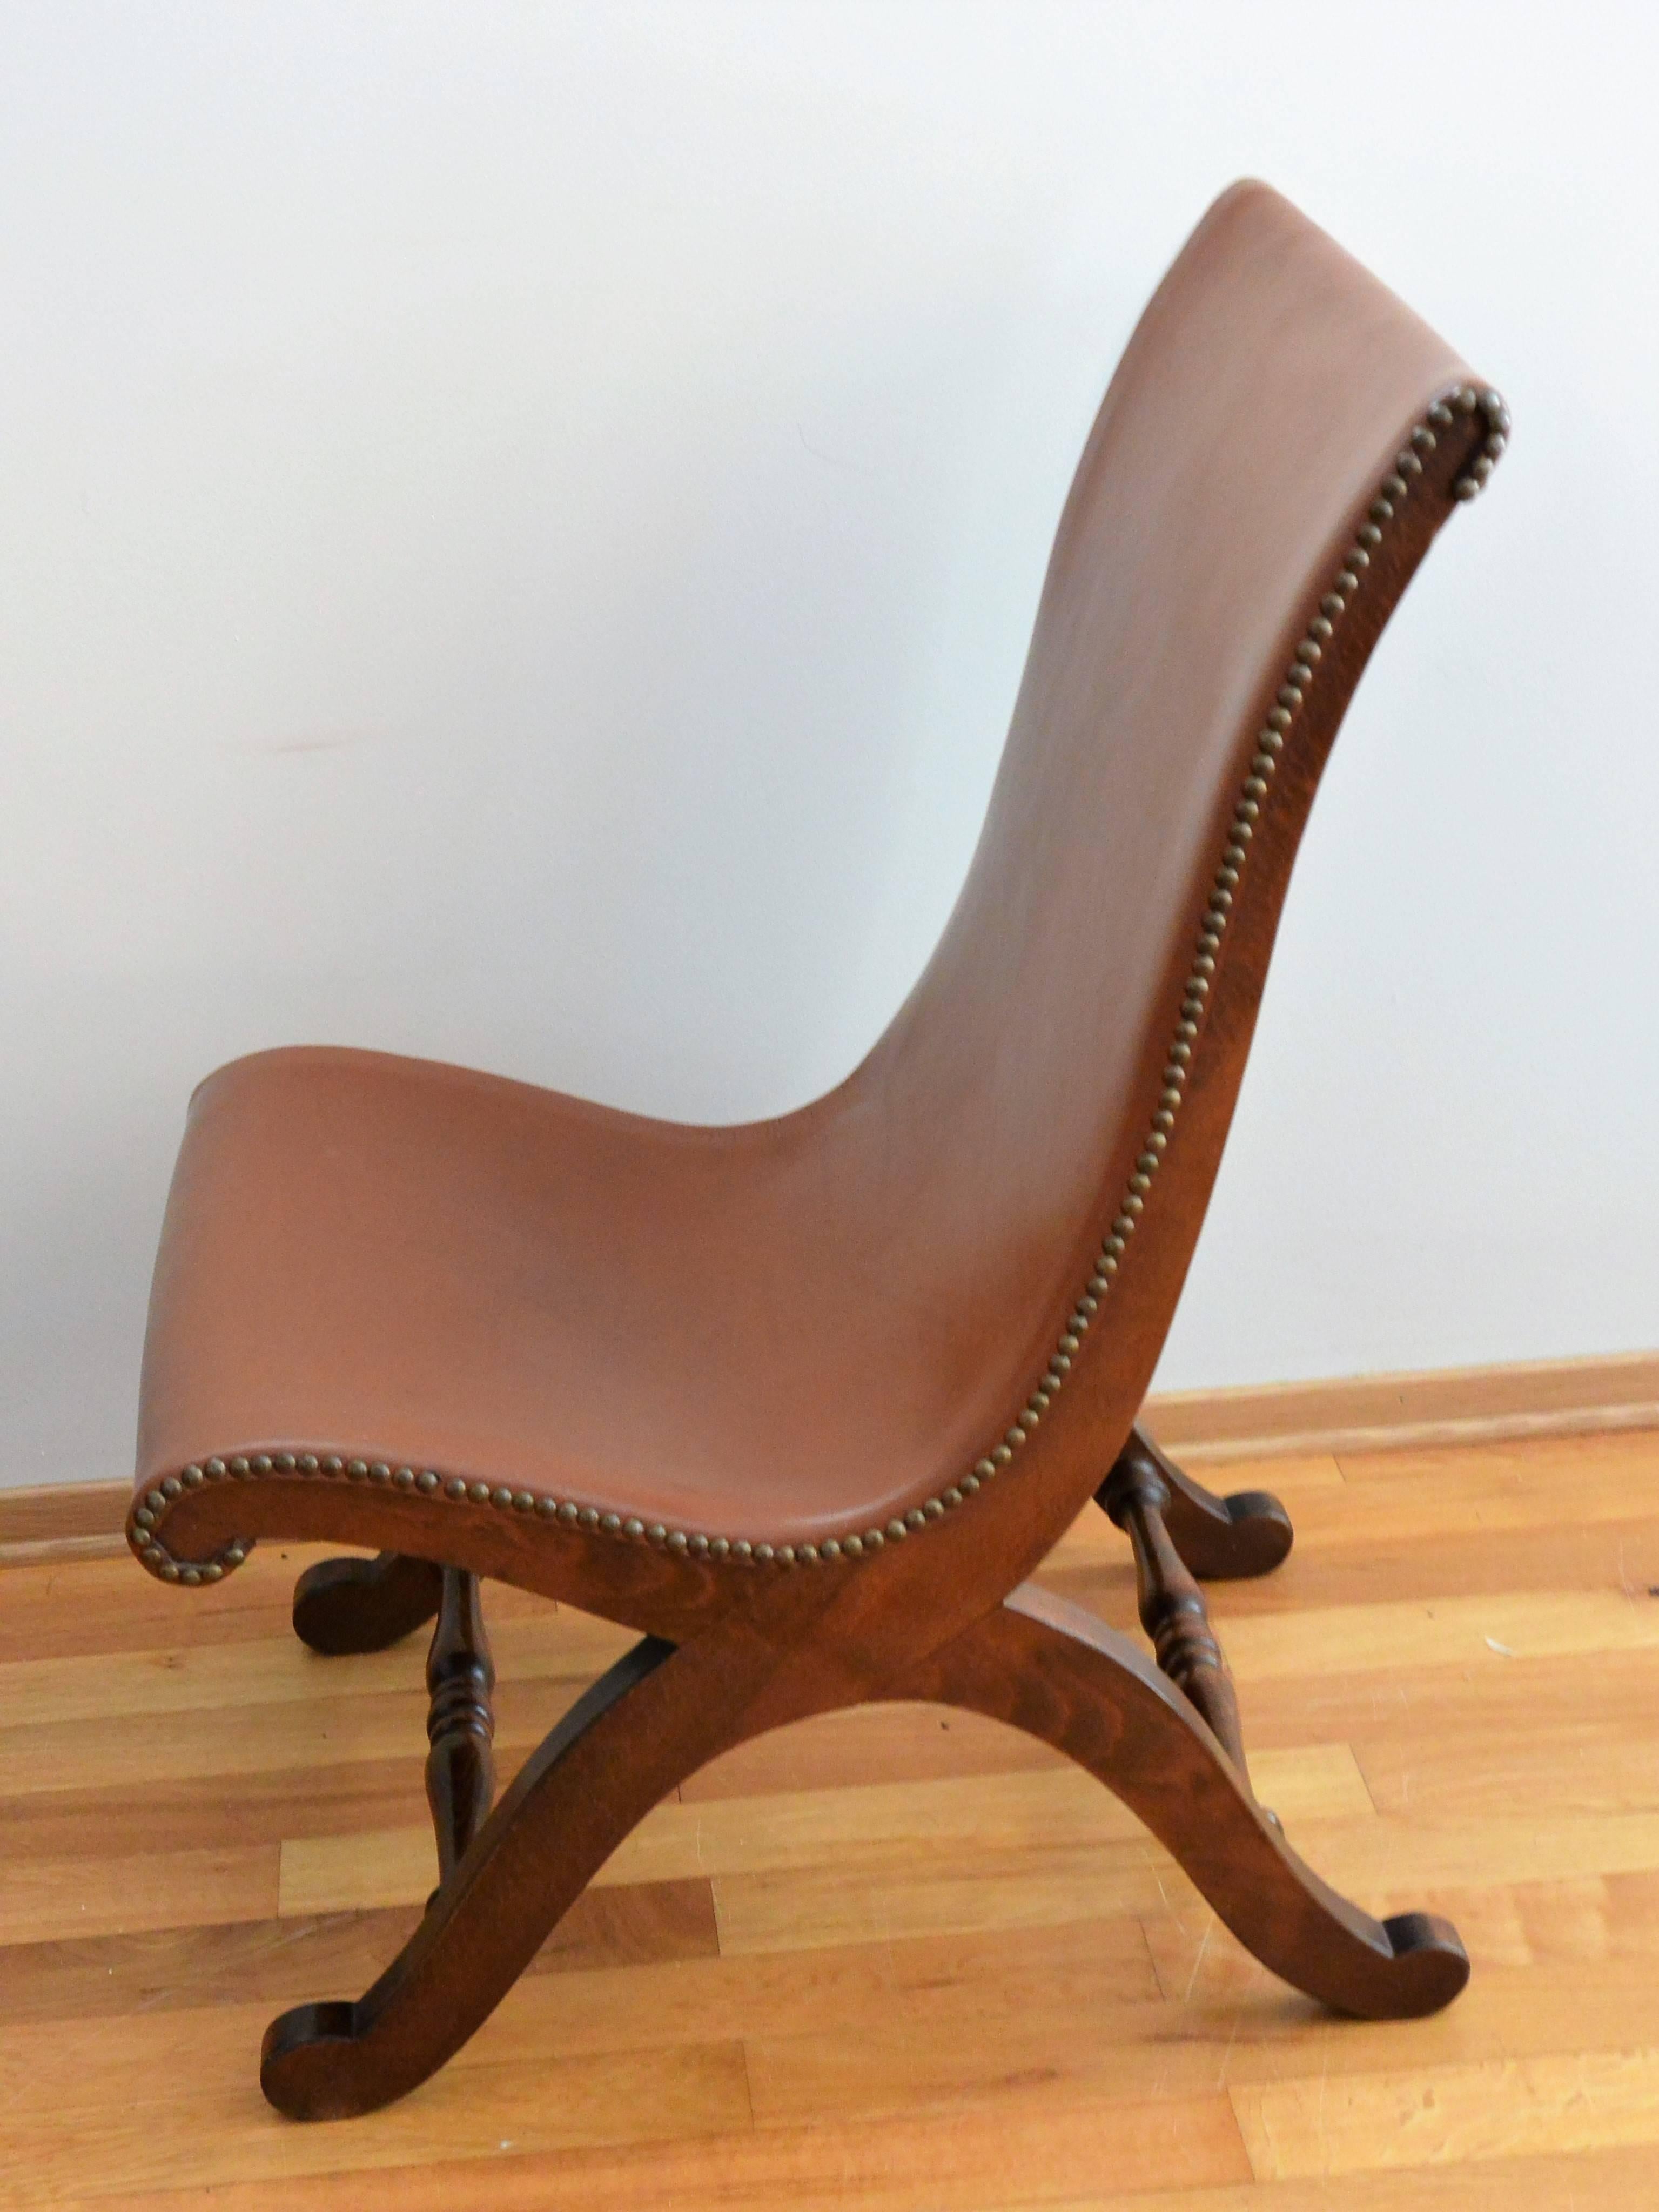 Fabulous Pierre Lottier leather slipper chairs originate from the 1940s-1950s. They were designed by Pierre Lottier for Valenti and were made in Spain. The thick leather hide on the chair pair remains near to the original condition and slight use.